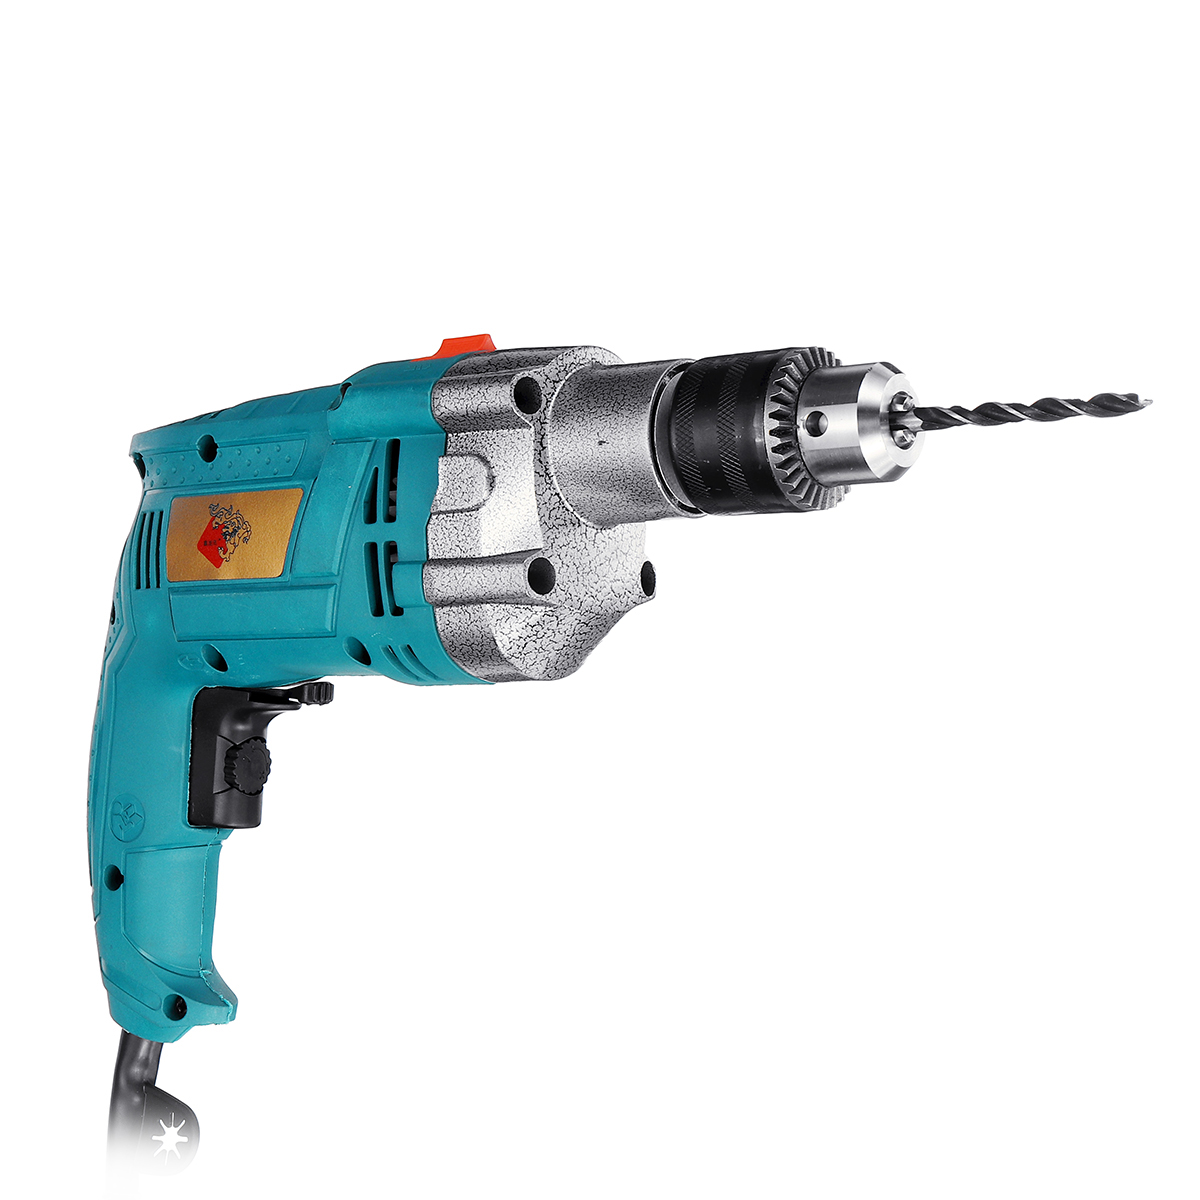 32Pcs-Set-1980W-3800RPM-Electric-Impact-Drill-Screwdriver-Household-Electric-Flat-Drill-Grinding-1466059-4